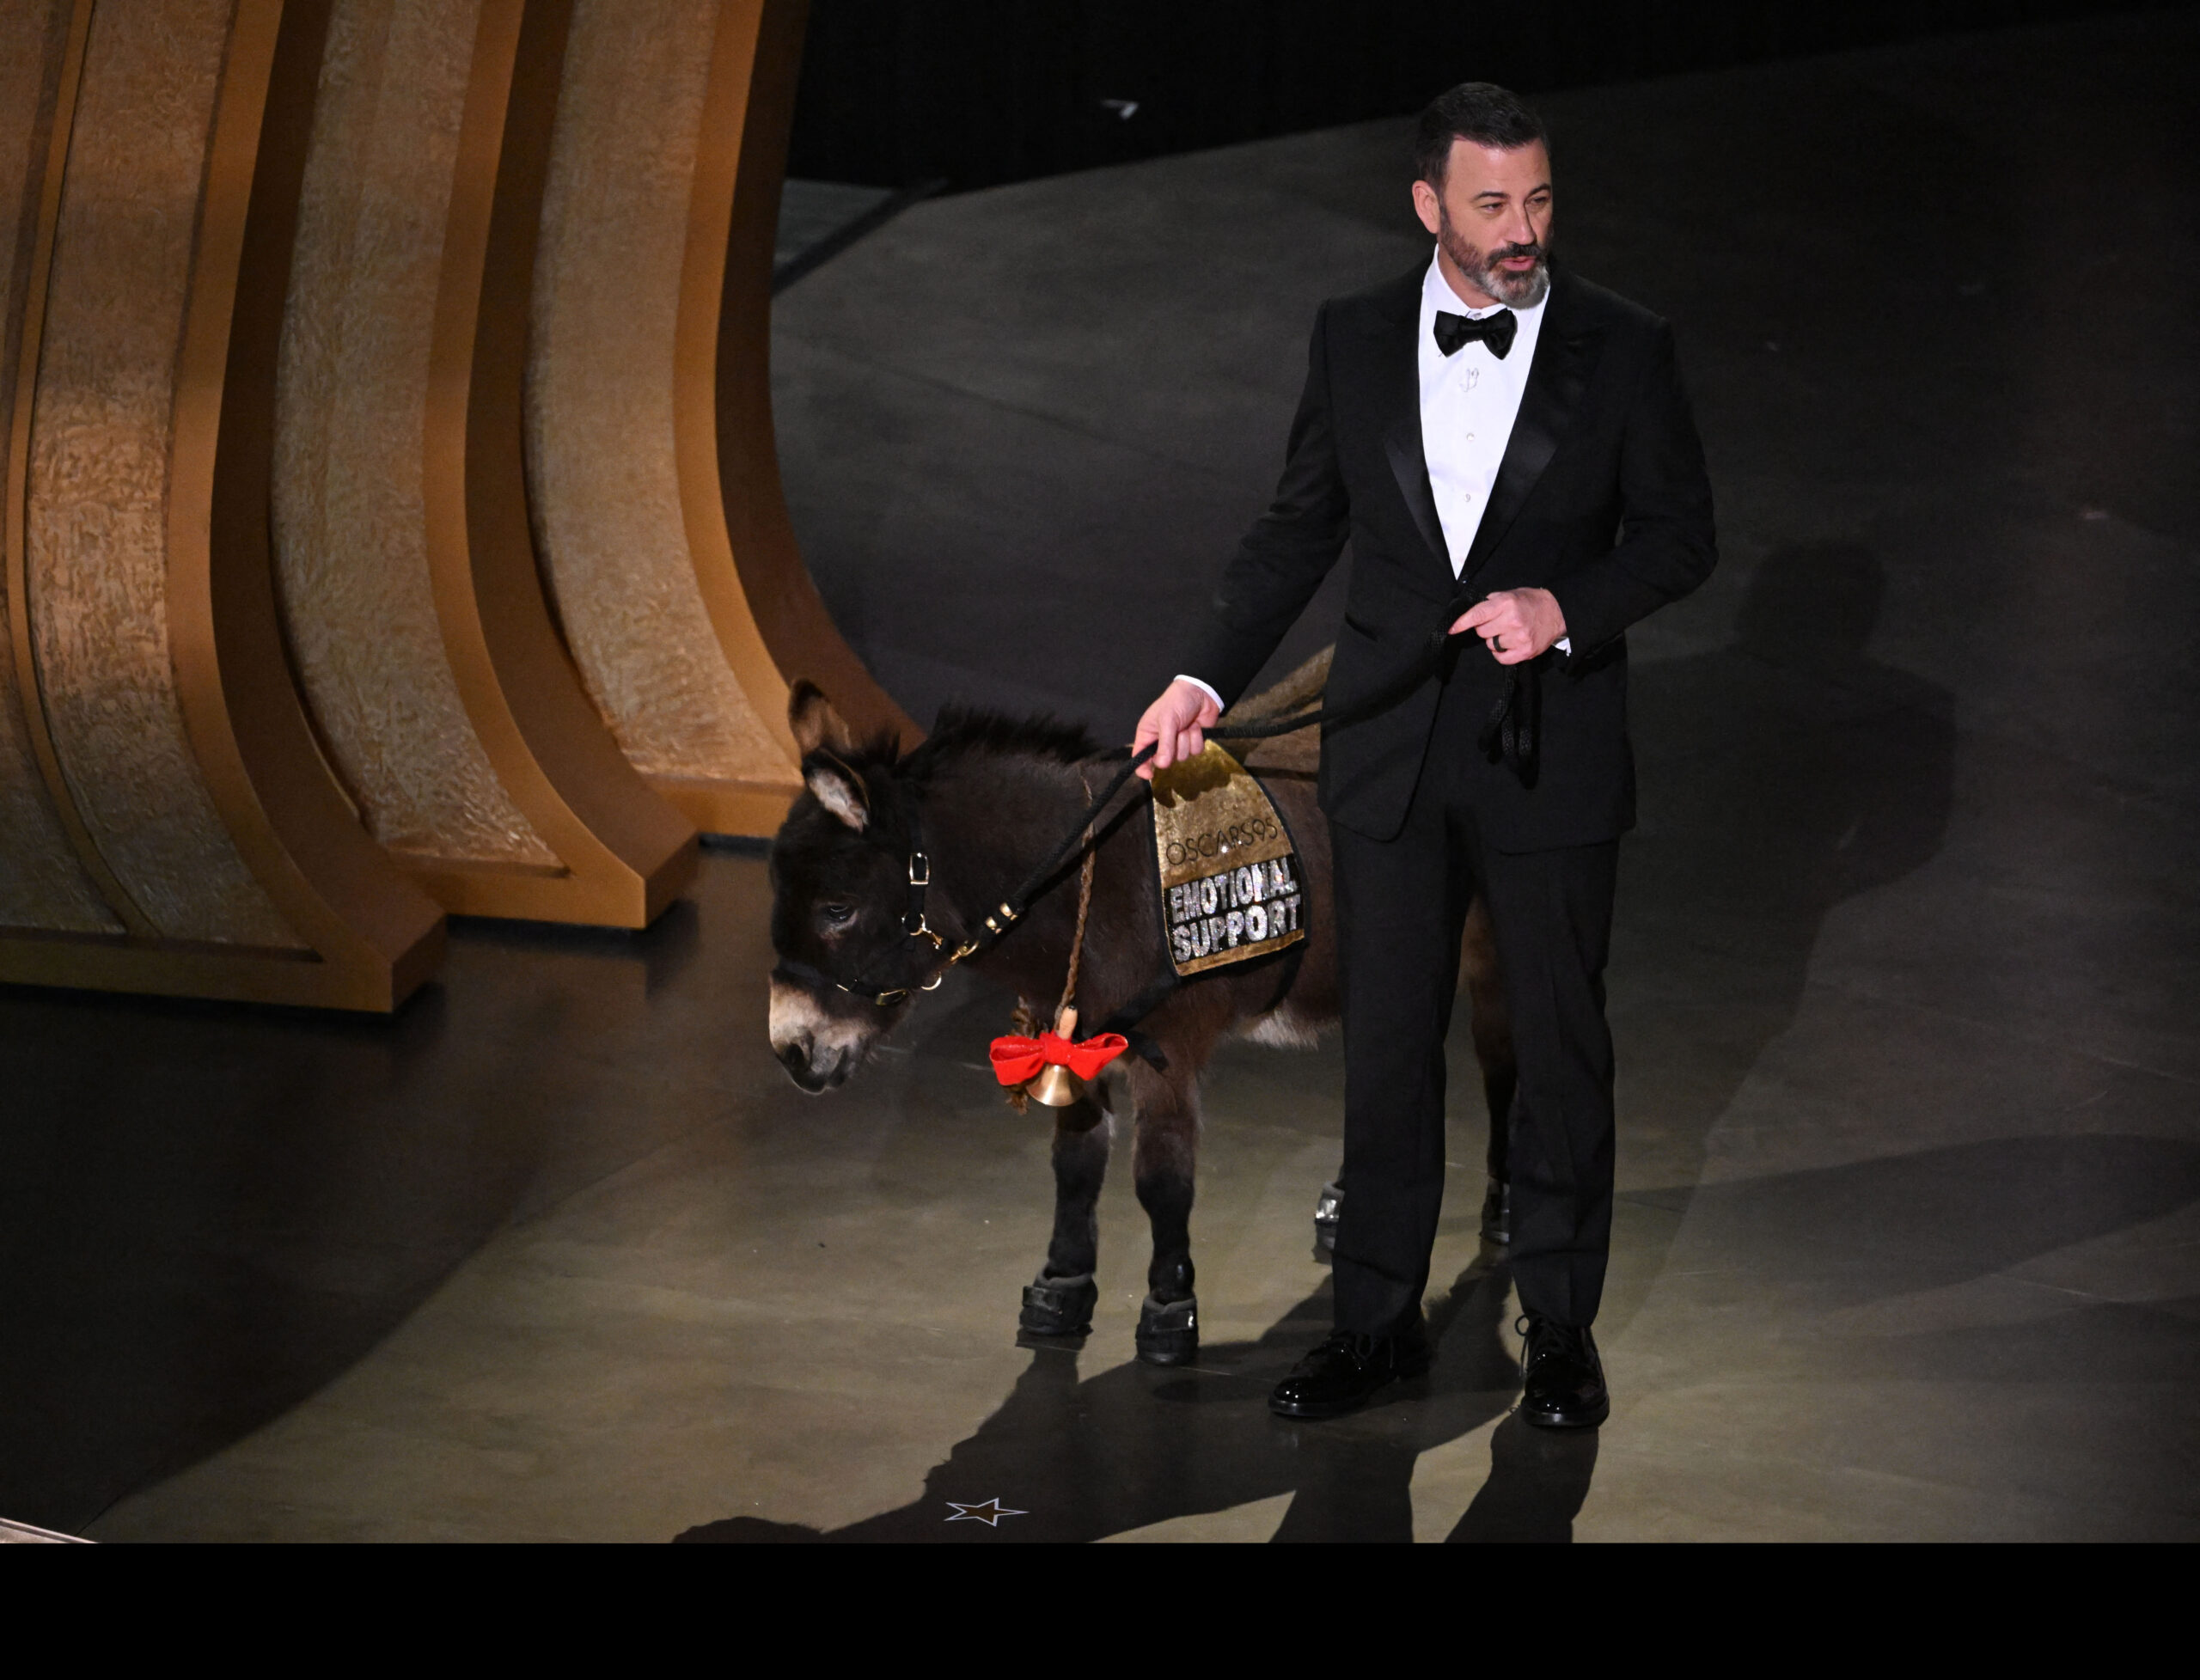 The adorable donkey who showed up during the Oscars, explained